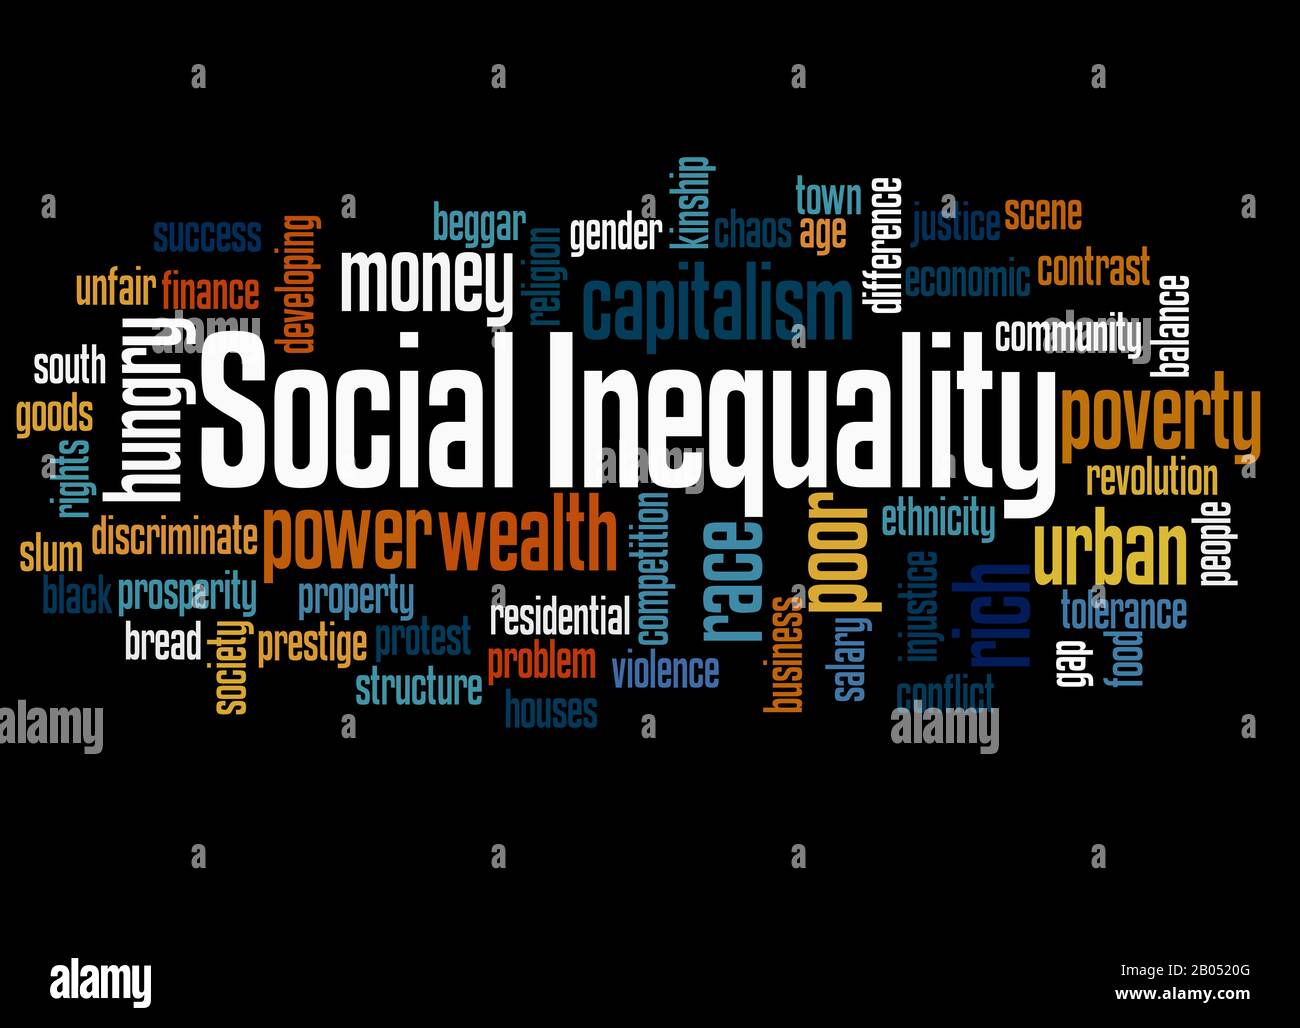 Social Inequality word cloud concept on black background. Stock Photo